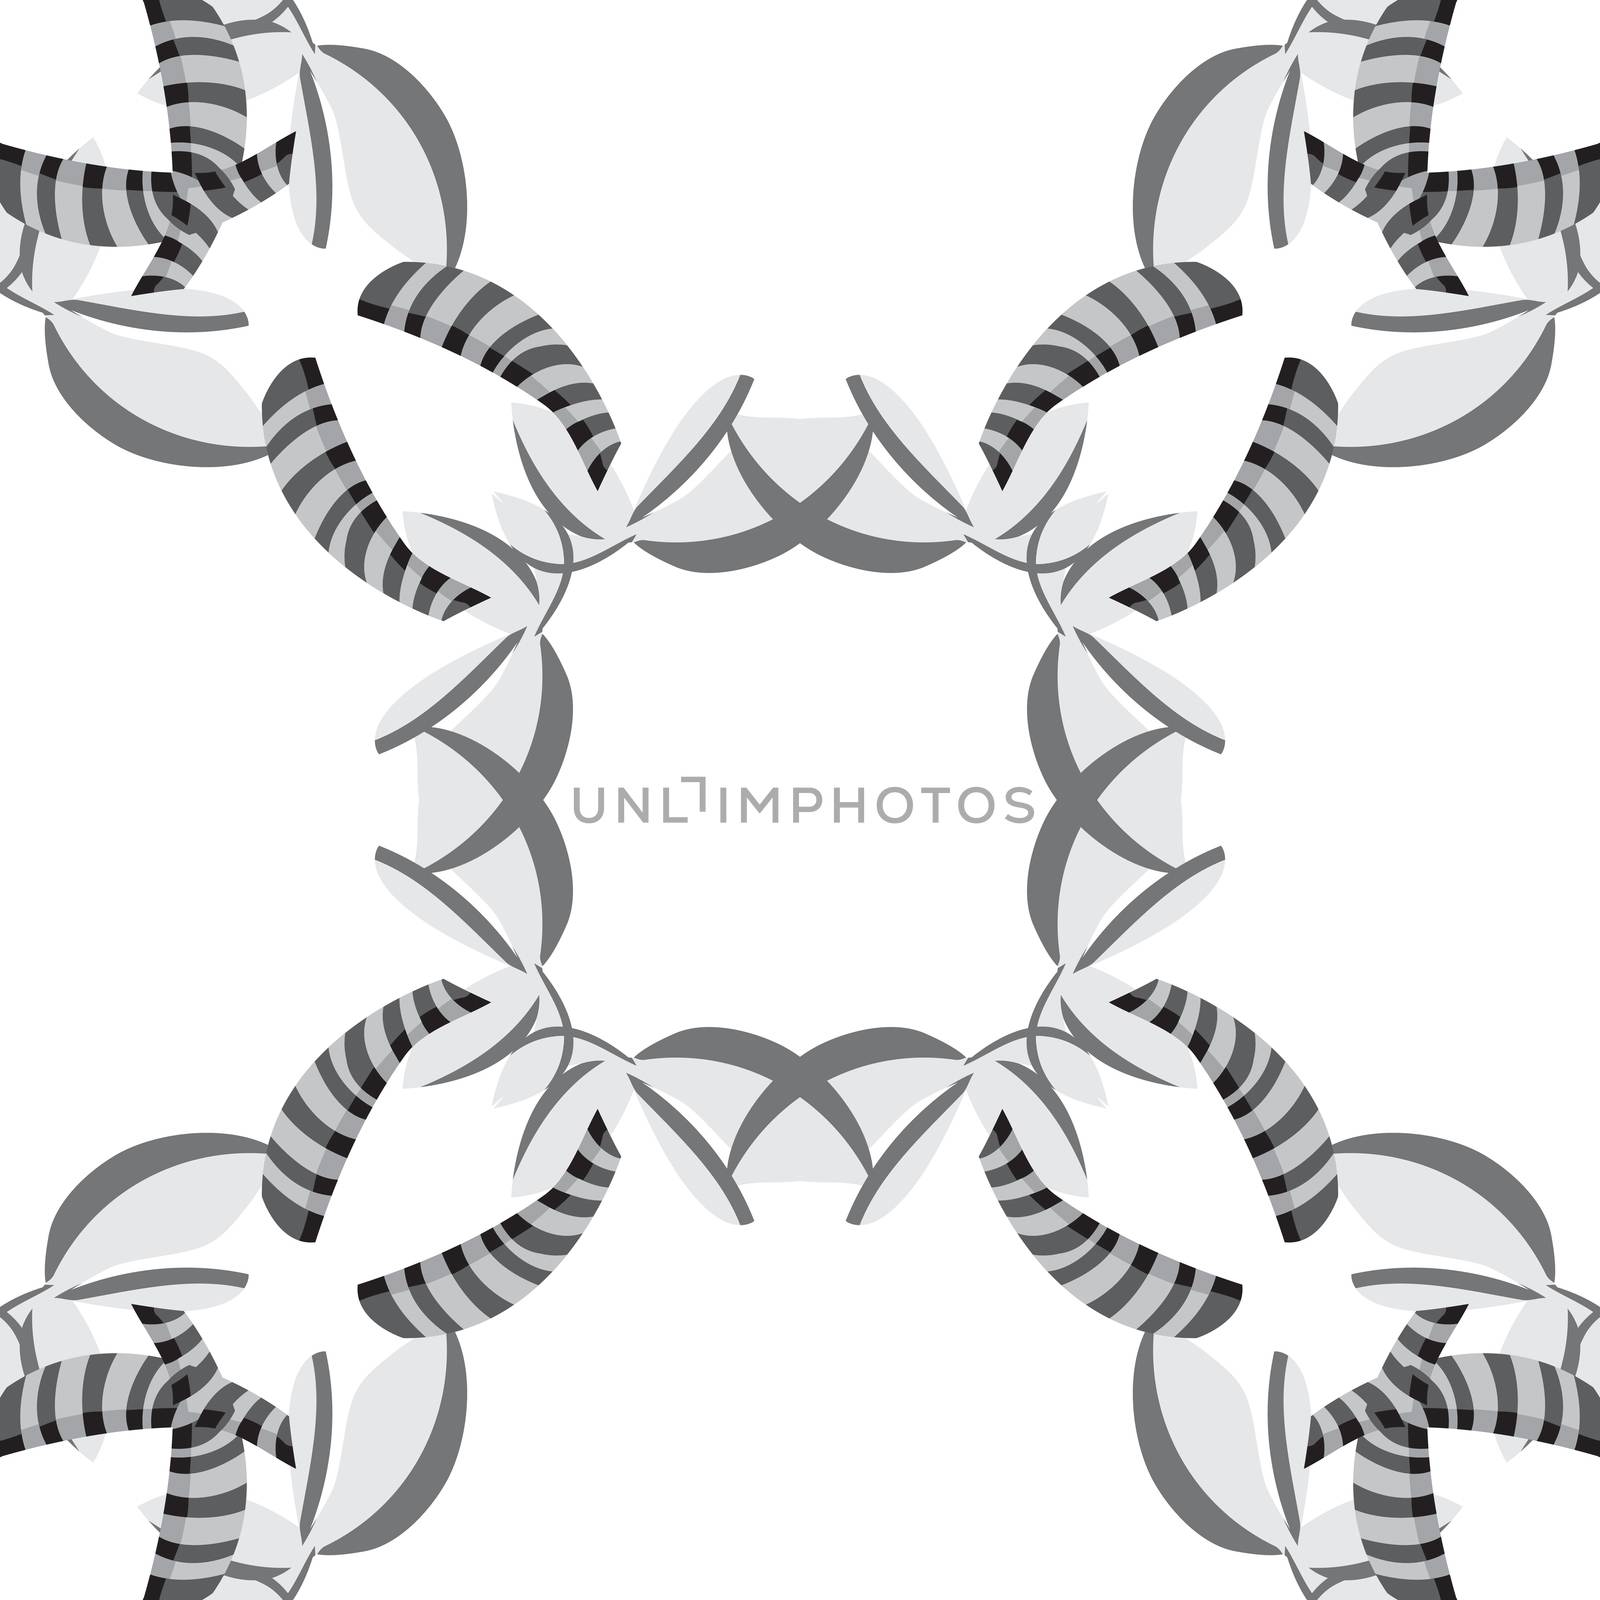 Repeating tiled background pattern of gray seashells